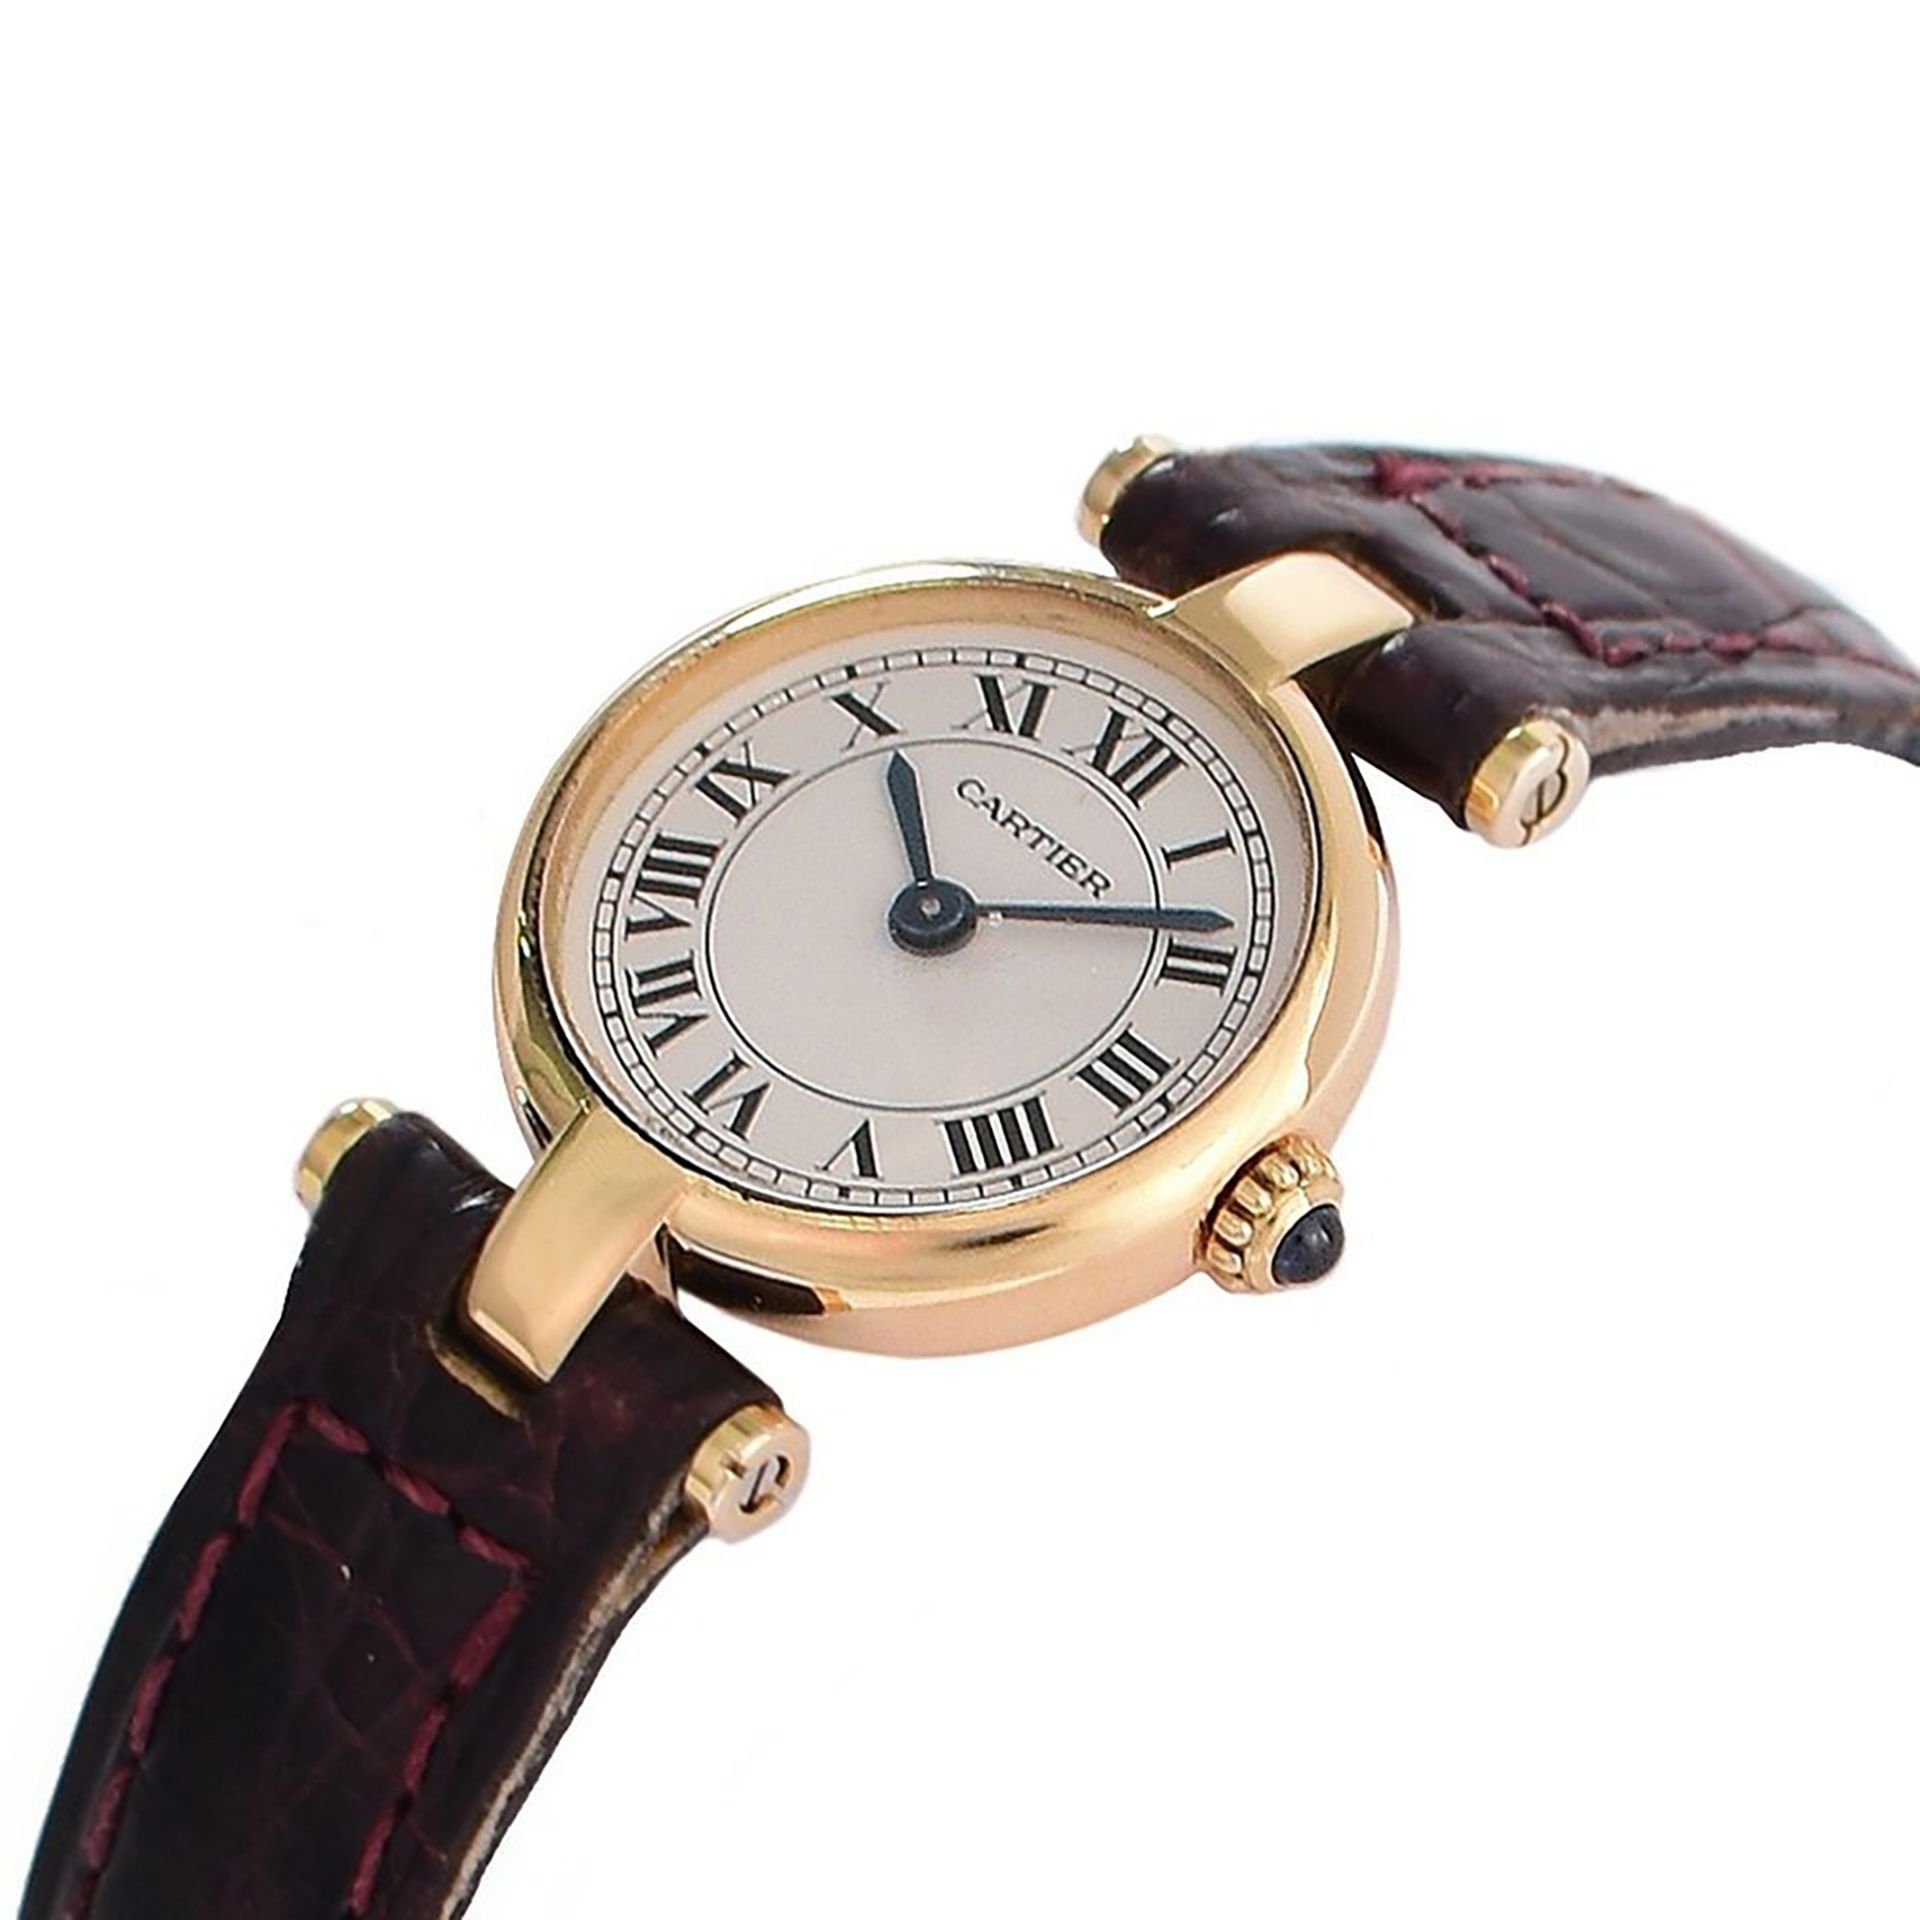 Cartier Must Vintage ladies' wristwatch from the 80s - Image 4 of 4